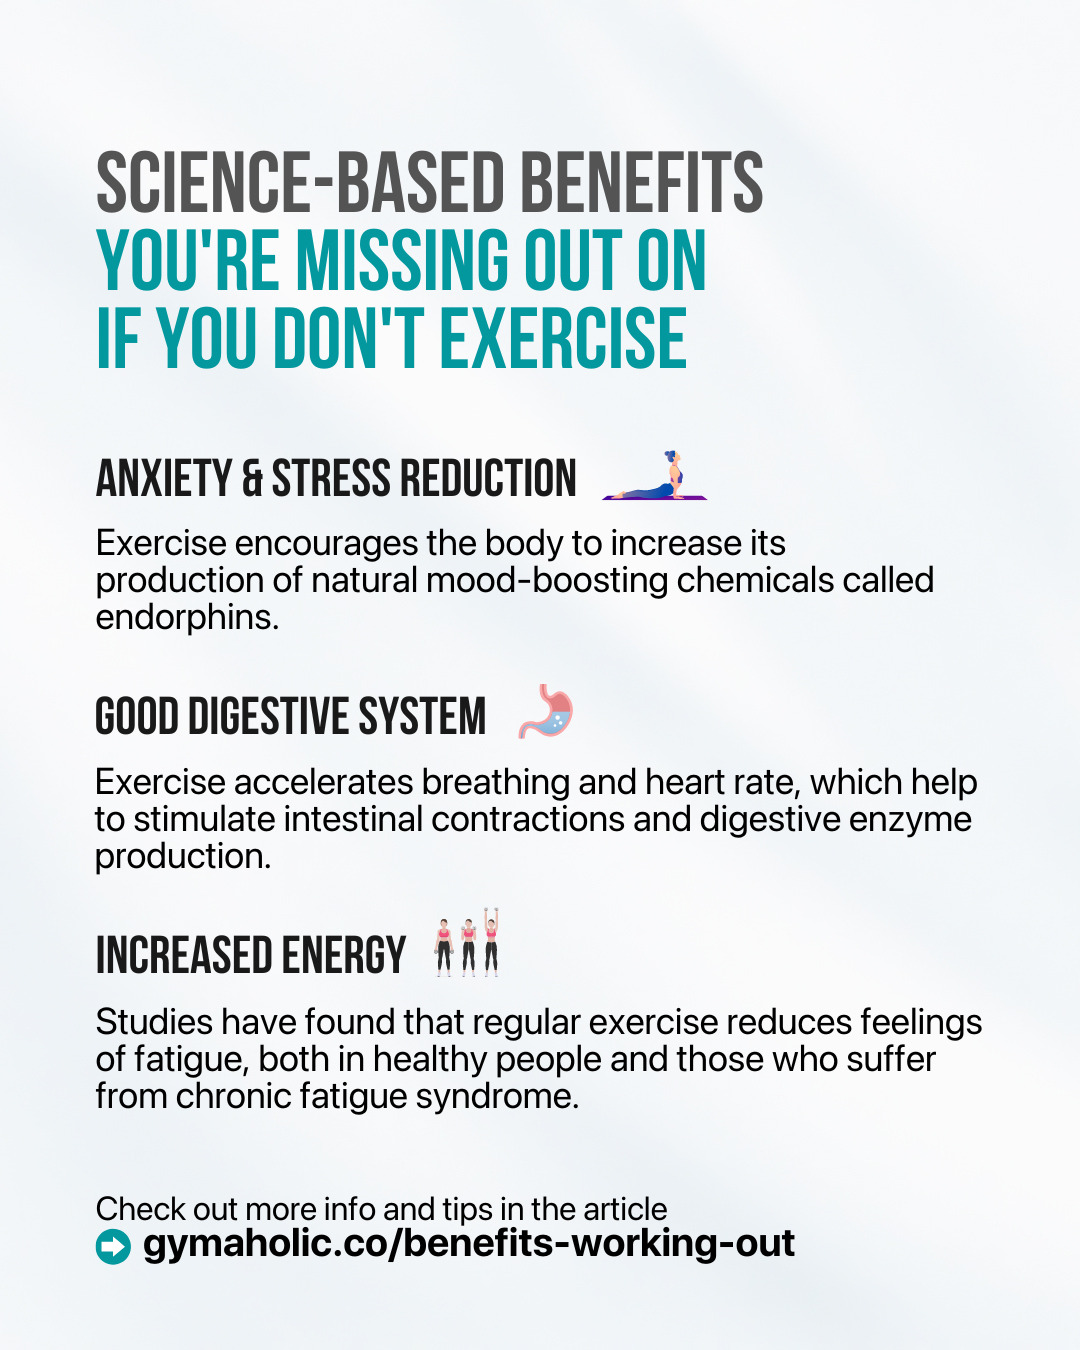 Science-based benefits you’re missing out on if you don’t exercise